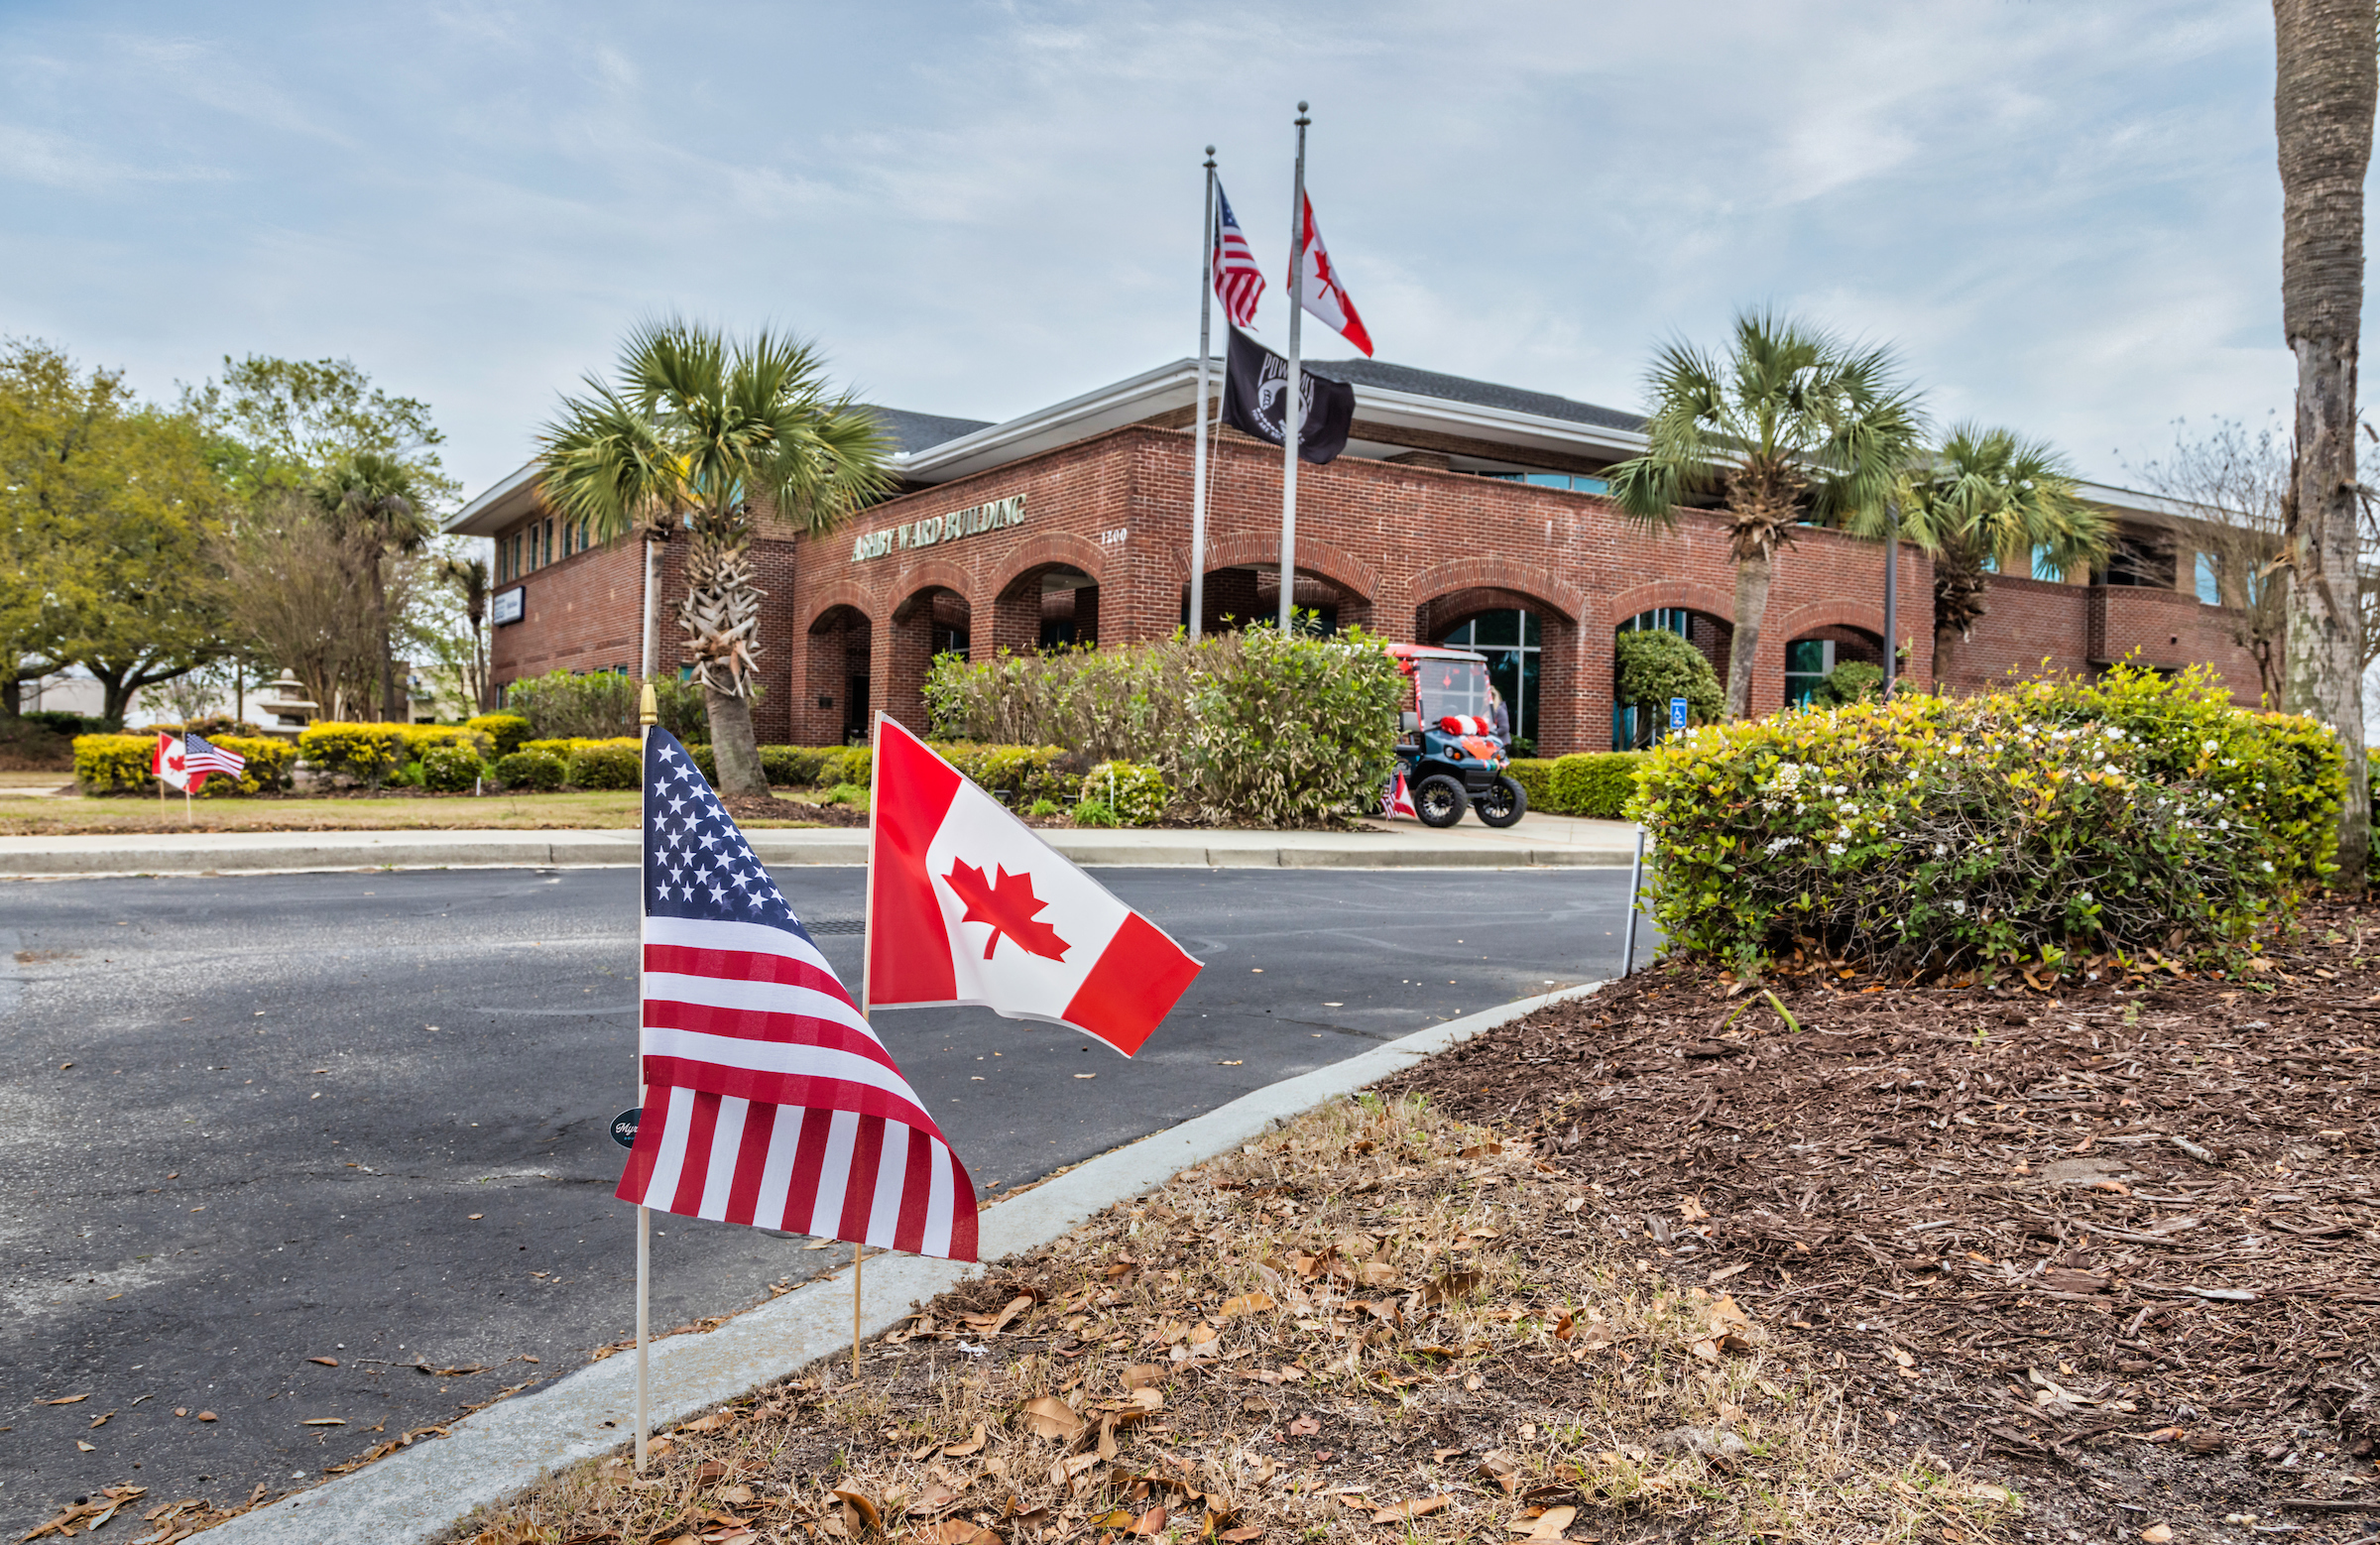 Myrtle Beach Area Chamber of commerce Building with american and canadian flags 